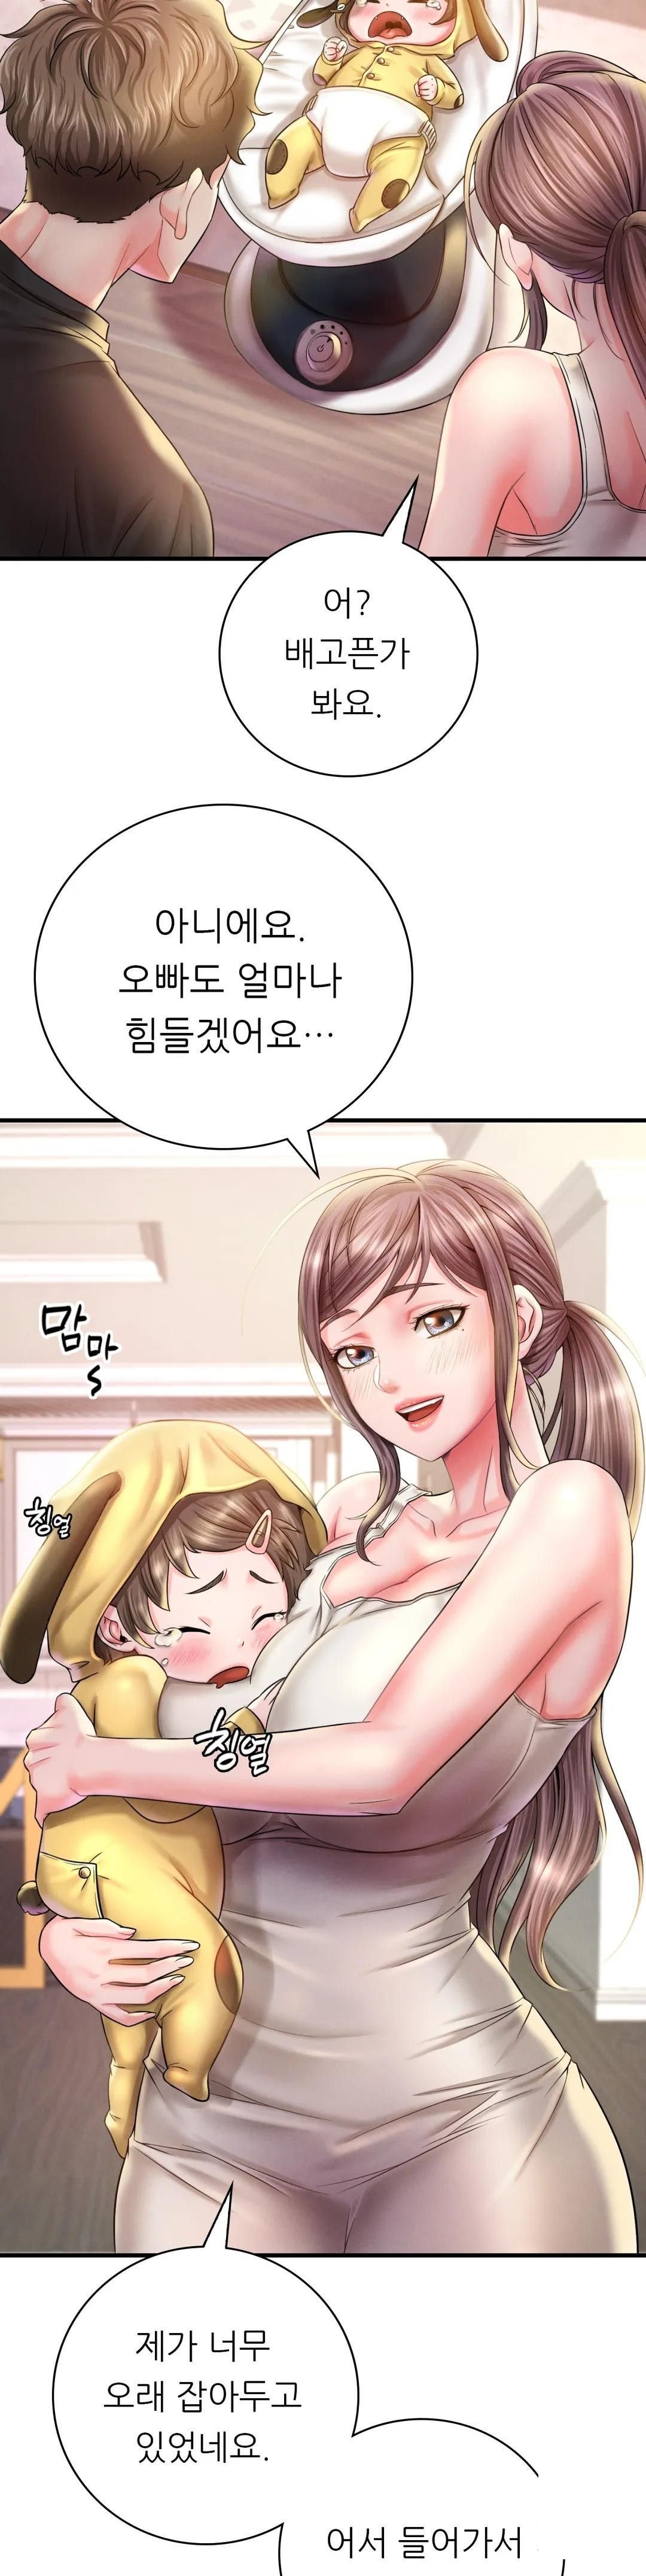 she-wants-to-get-drunk-raw-chap-3-33